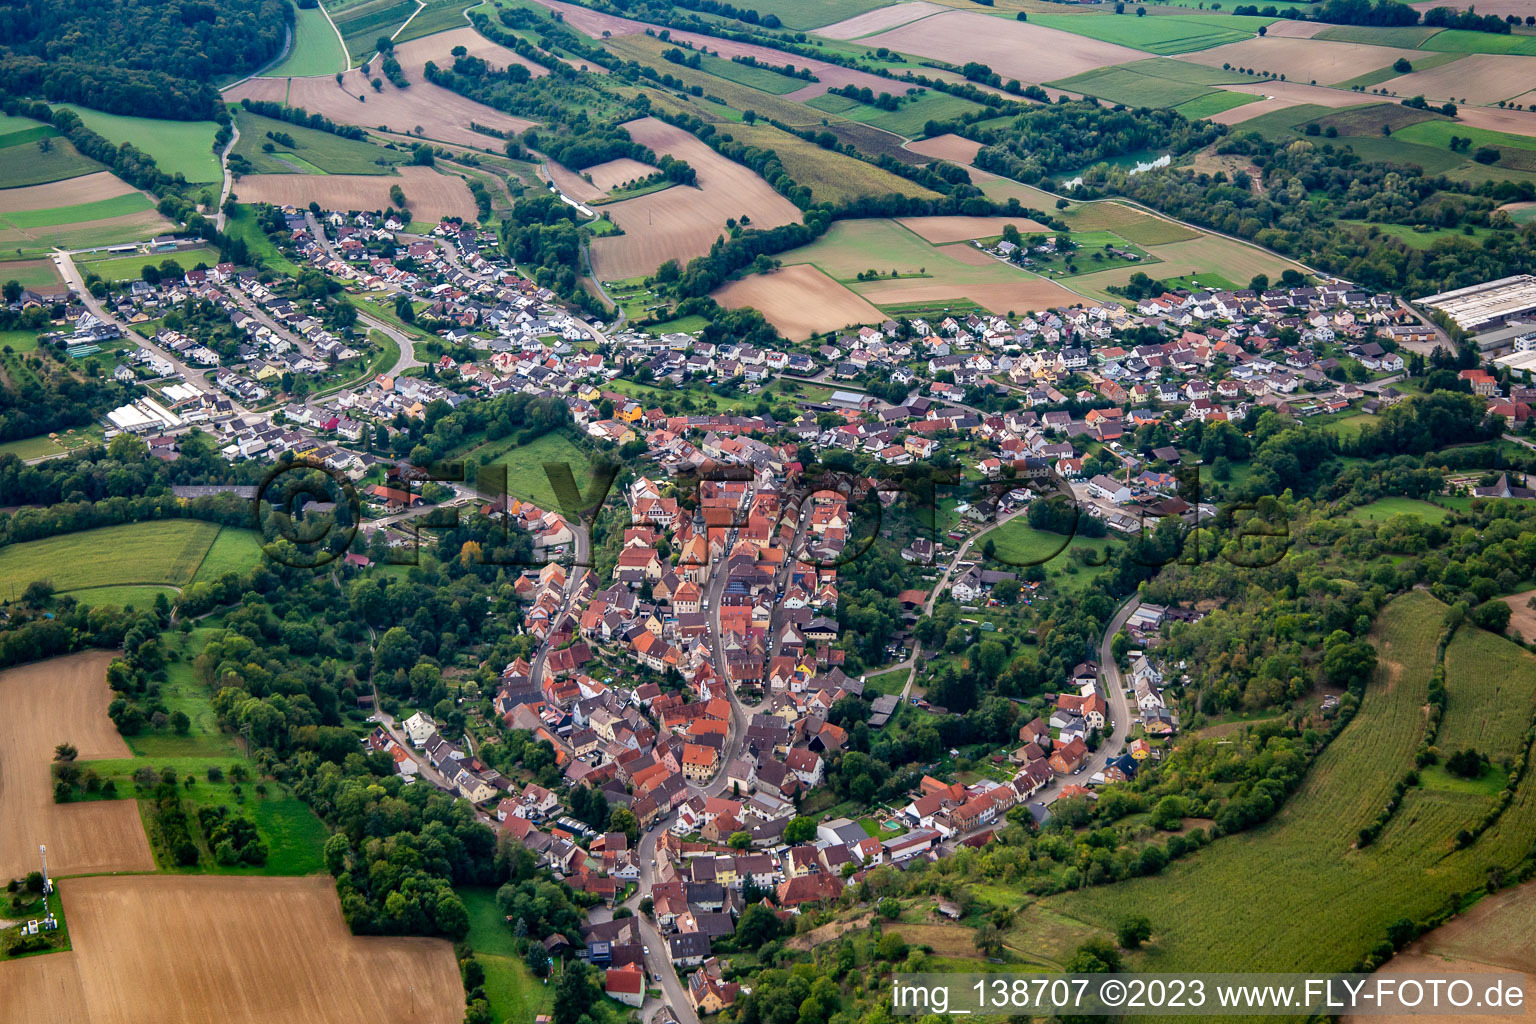 From the east in the district Gochsheim in Kraichtal in the state Baden-Wuerttemberg, Germany